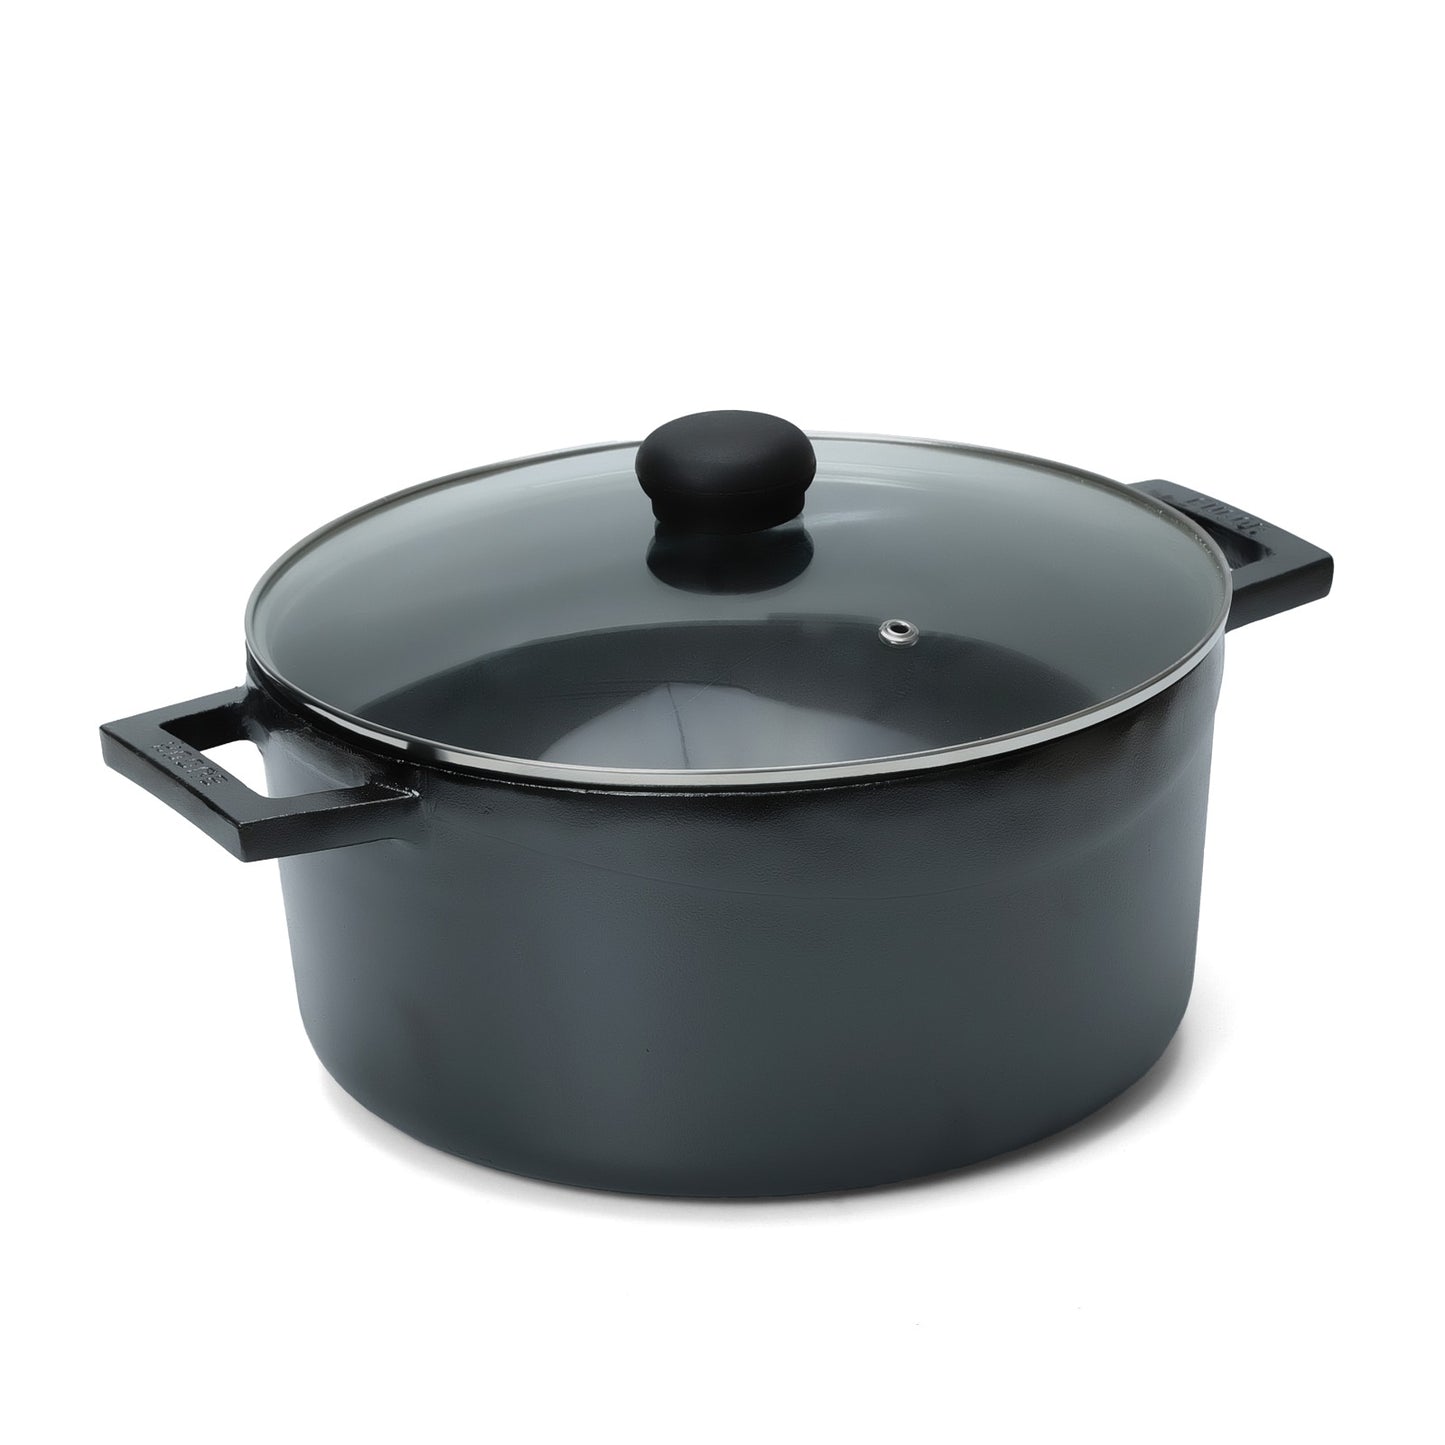 Pre-Seasoned Cast Iron Dutch Oven | Biryani Pot | Cast Iron Casserole with Heavy Bottom |Cooking Pot with Lid| Biryani Pot Induction Bottom| Cast Iron Cookware, 24cm/ 4.6 Litres (WITH LID)